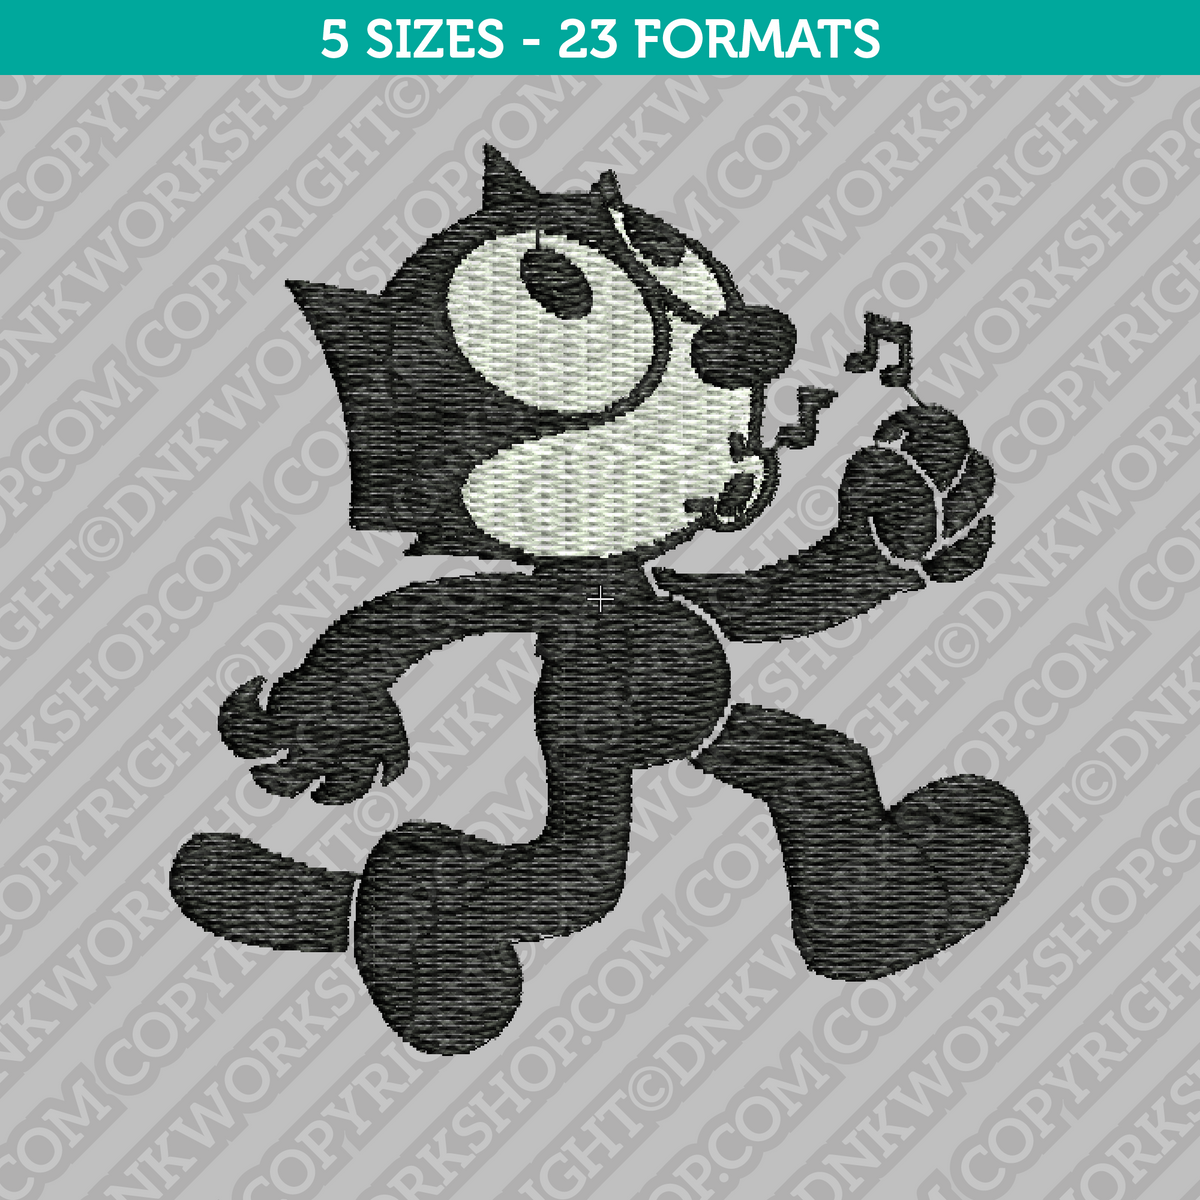 Felix the Cat embroidery kit by Un Chat Dans L-aiguille — The Craft Table